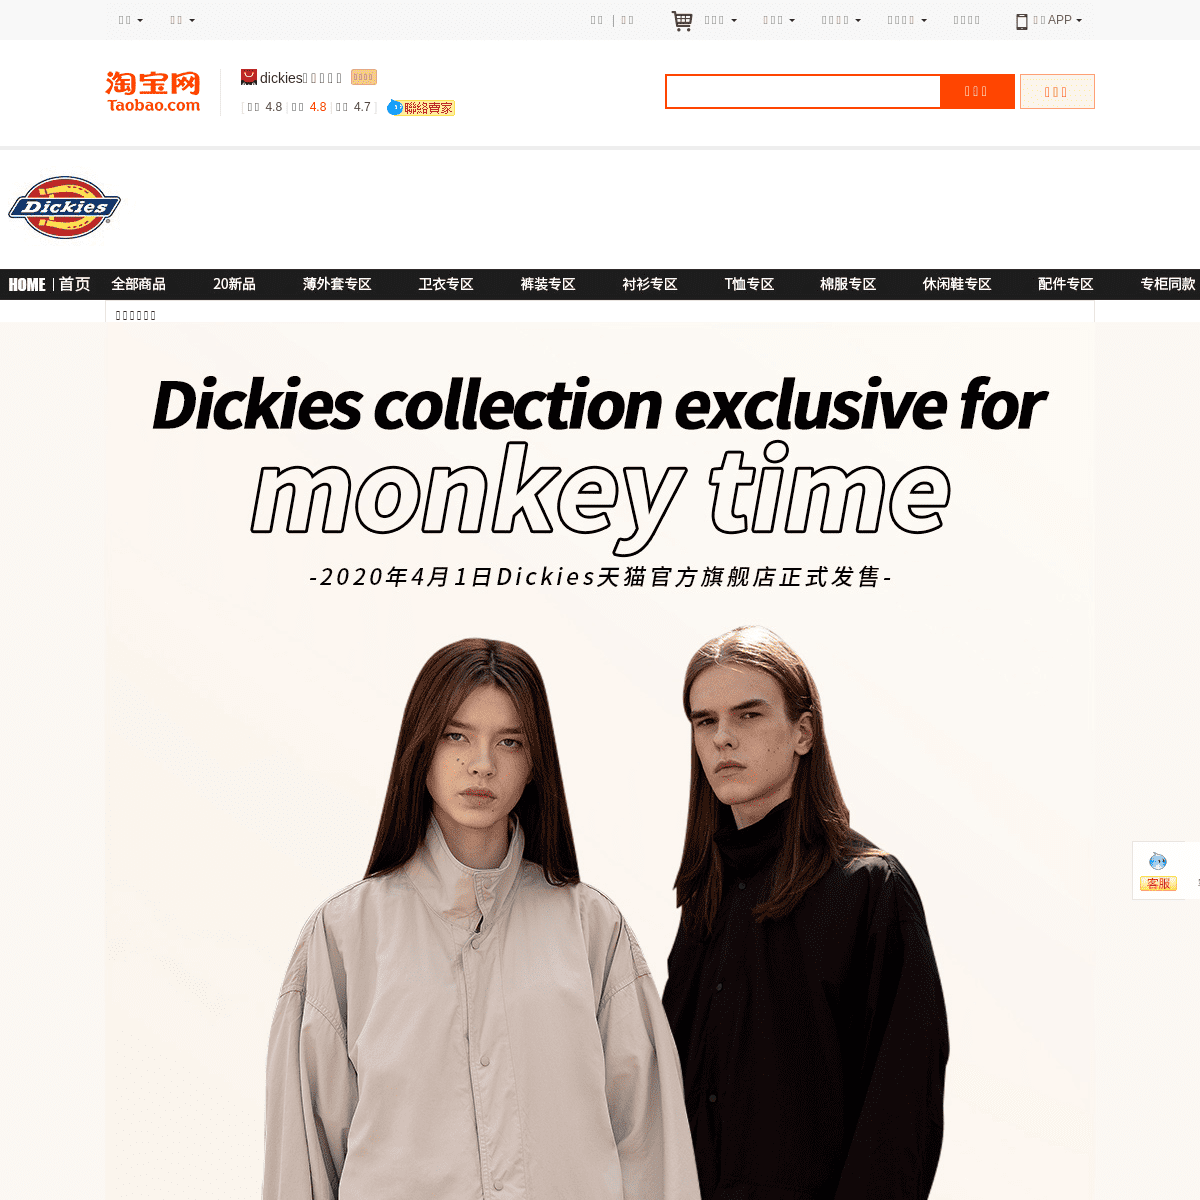 A complete backup of dickies.tmall.com